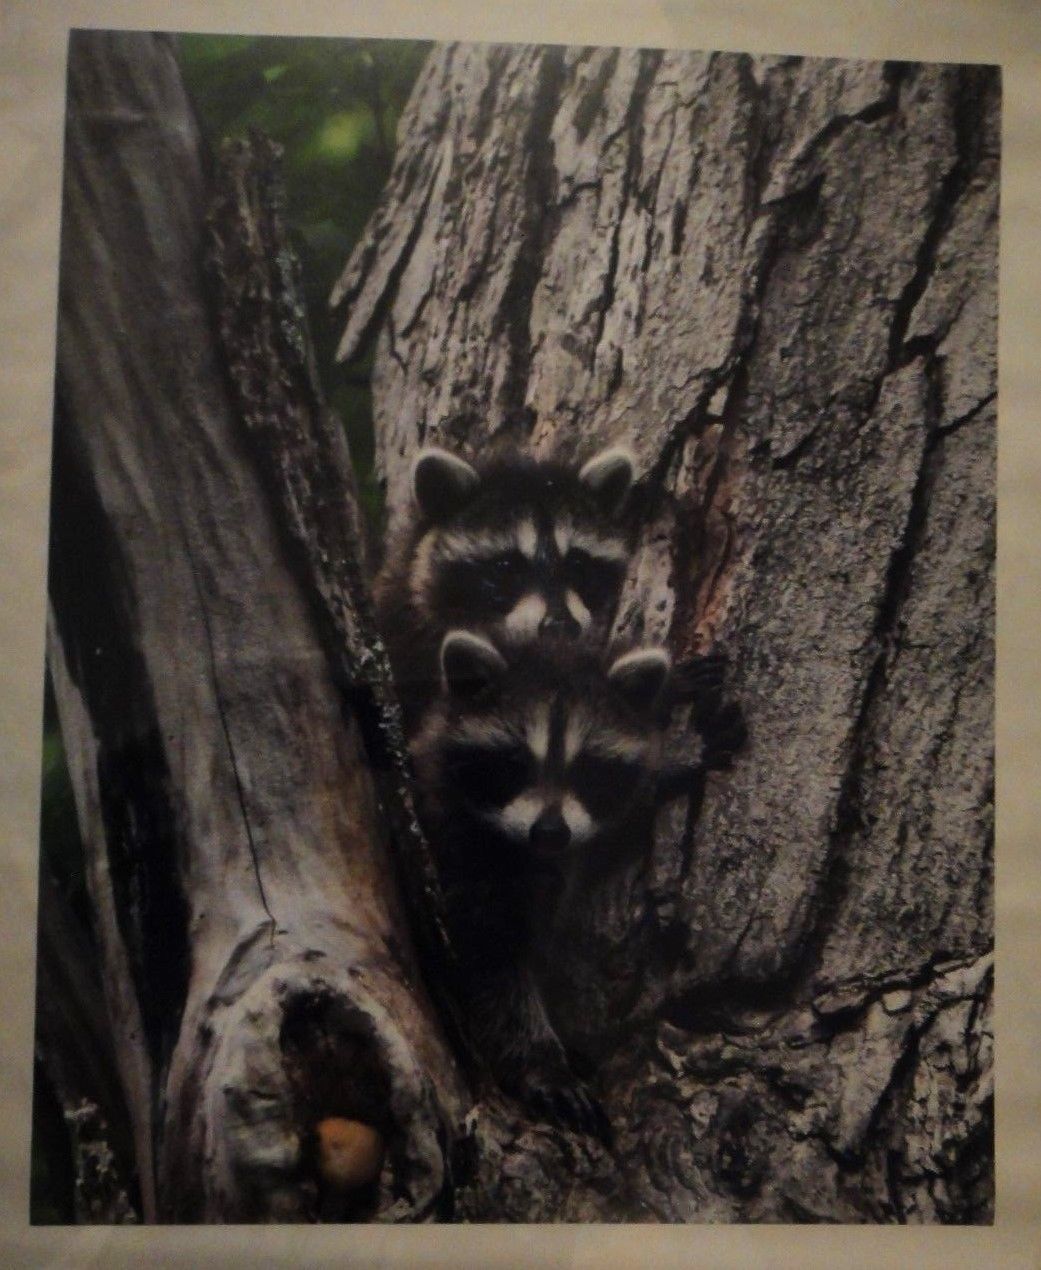 Primary image for Adorable and cute baby raccoons 16x20 unframed photo